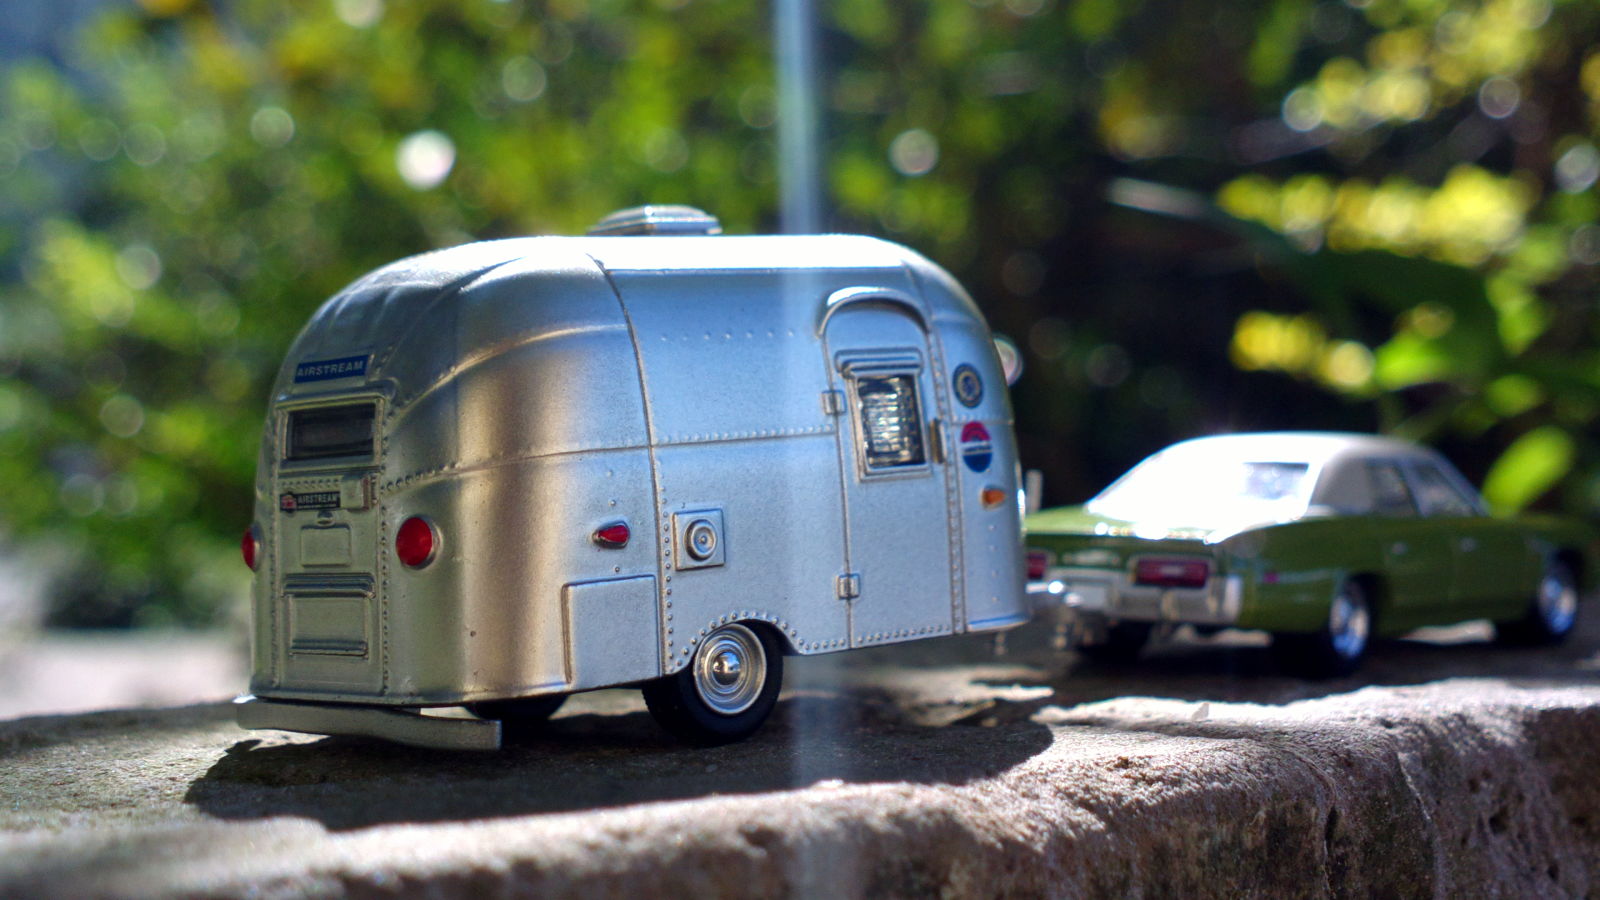 Illustration for article titled Weekend? Lets hitch the Airstream and go!